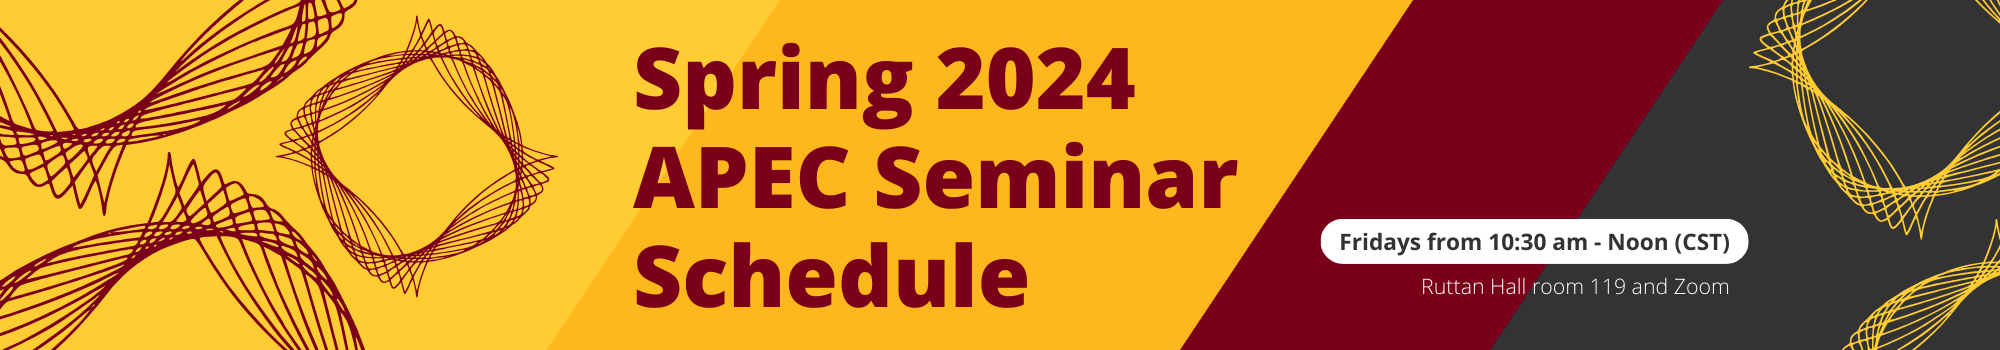 Spring 2024 APEC Seminar Schedule, Fridays from 10:30am - Noon (CST), Ruttan Hall room 119 and Zoom